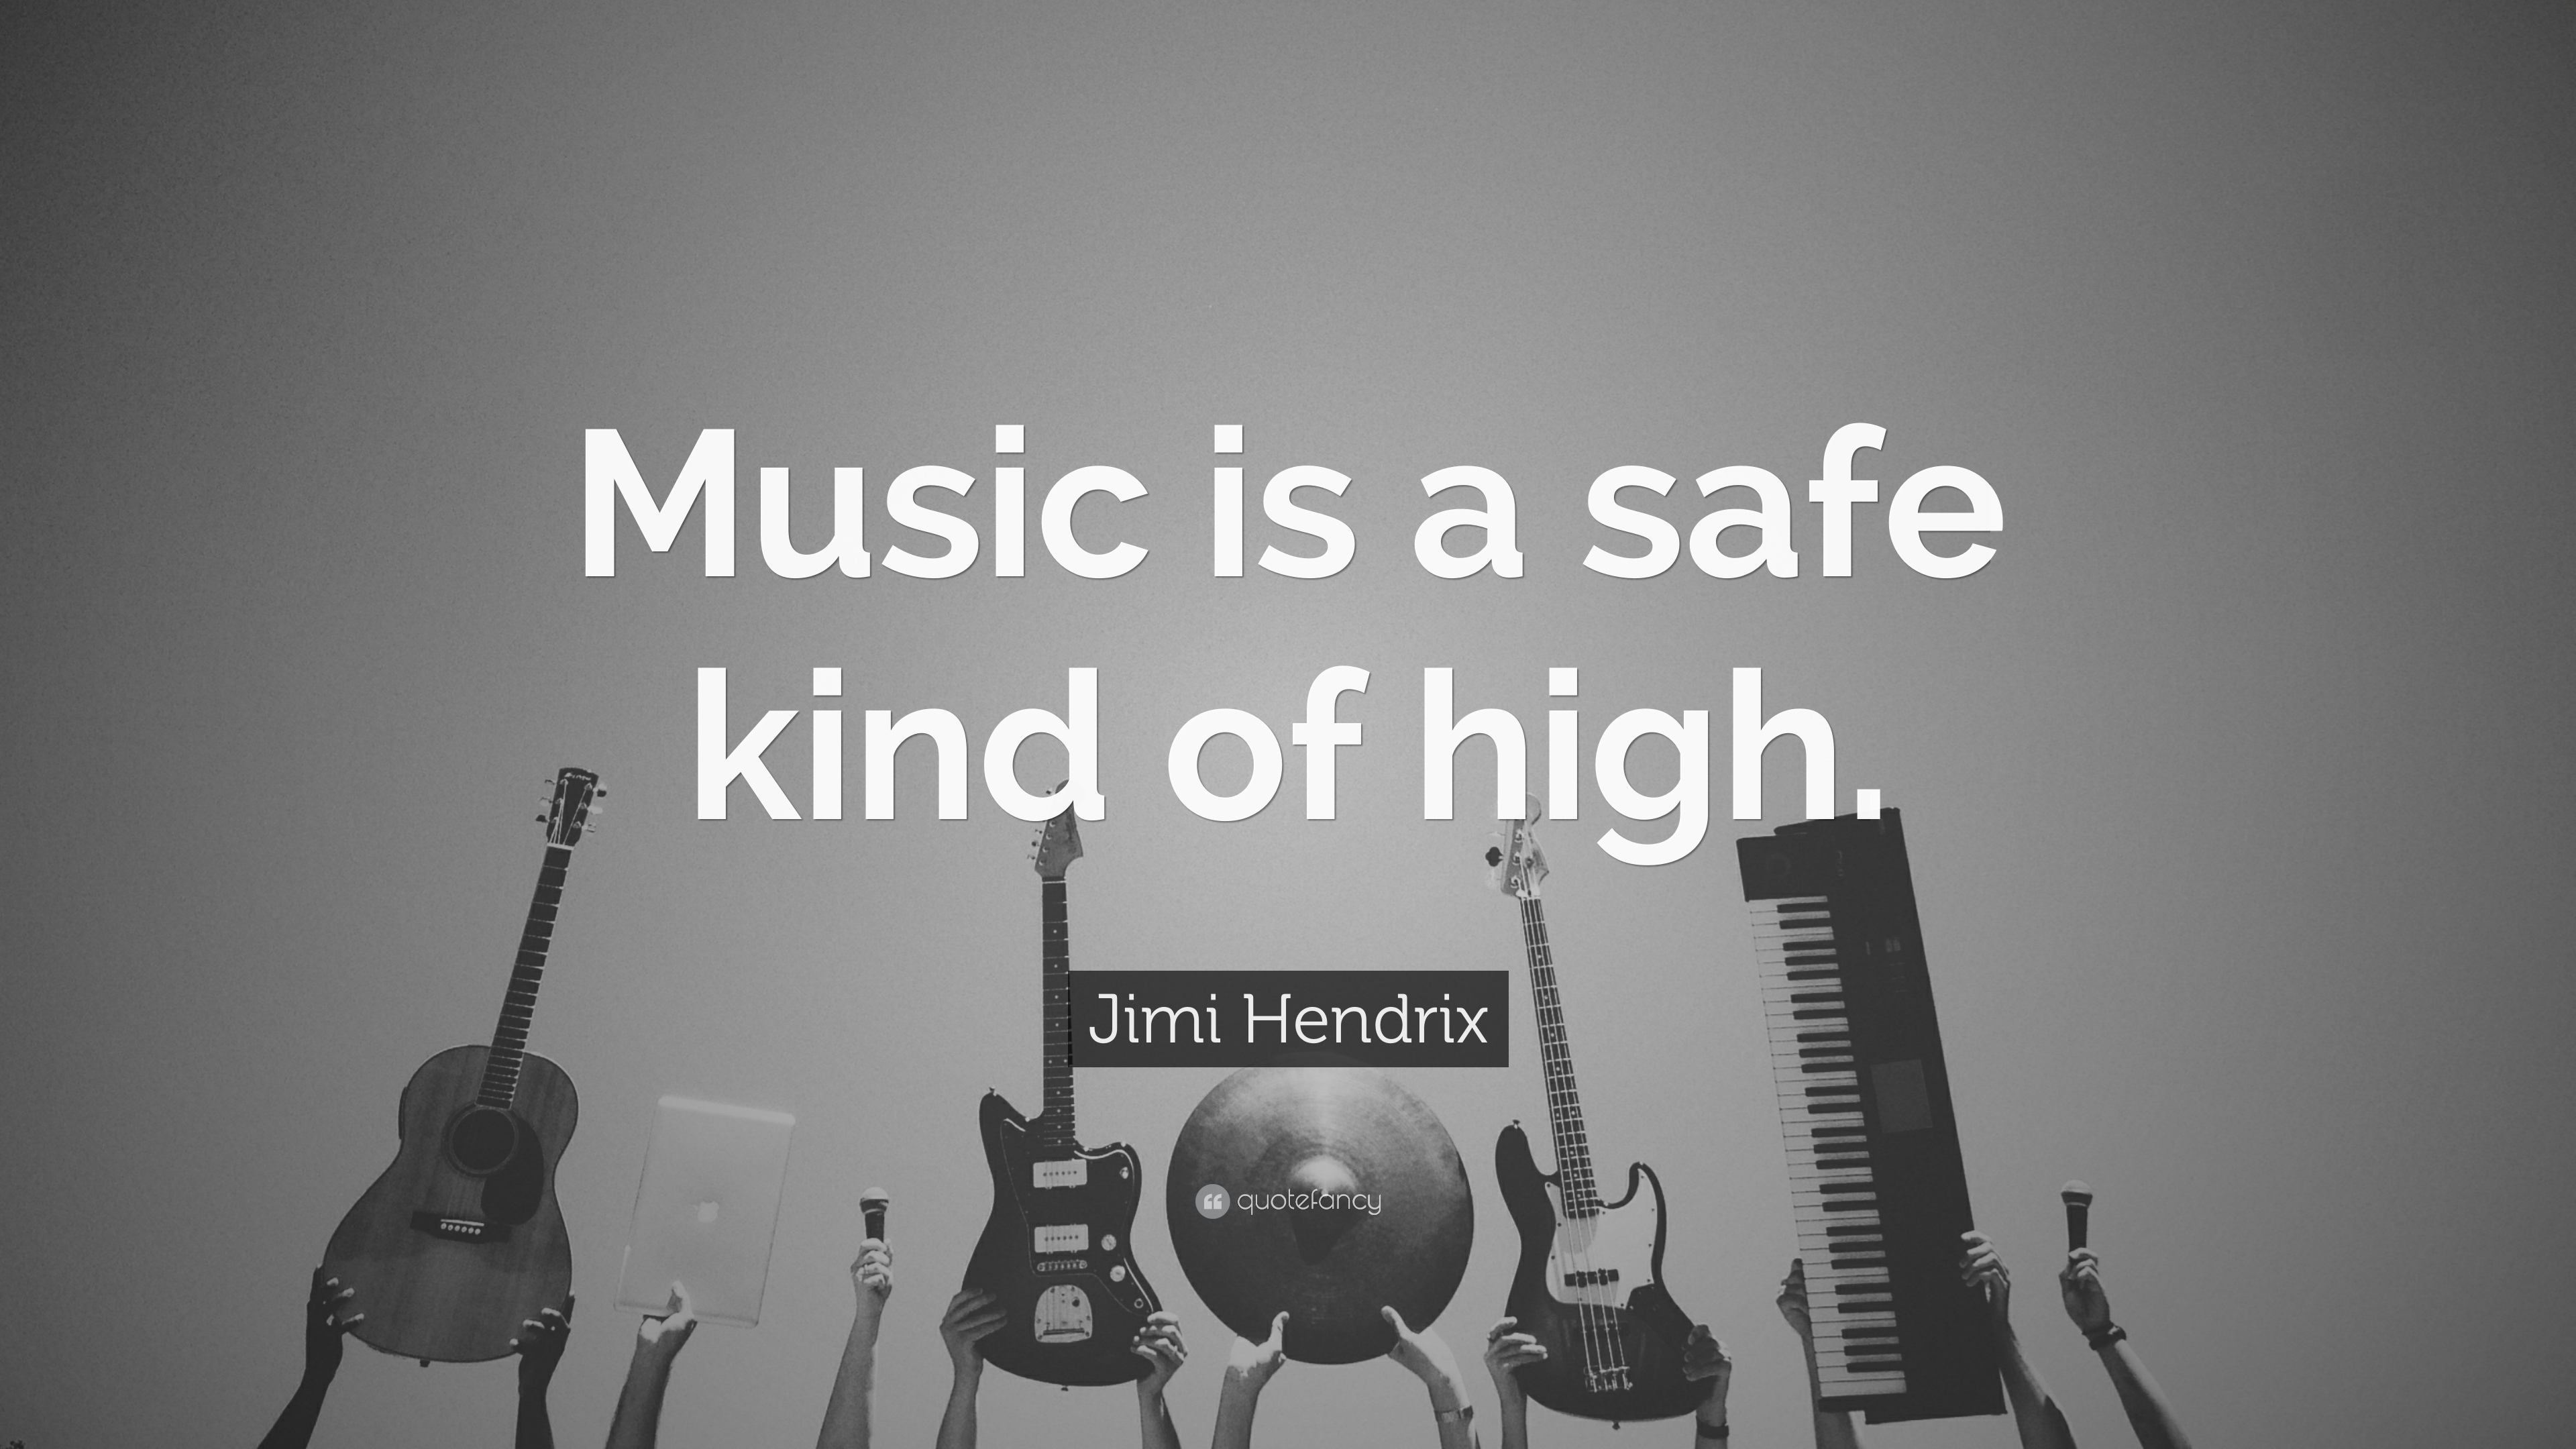 Music is a safe kind of high. Jimi Hendrix